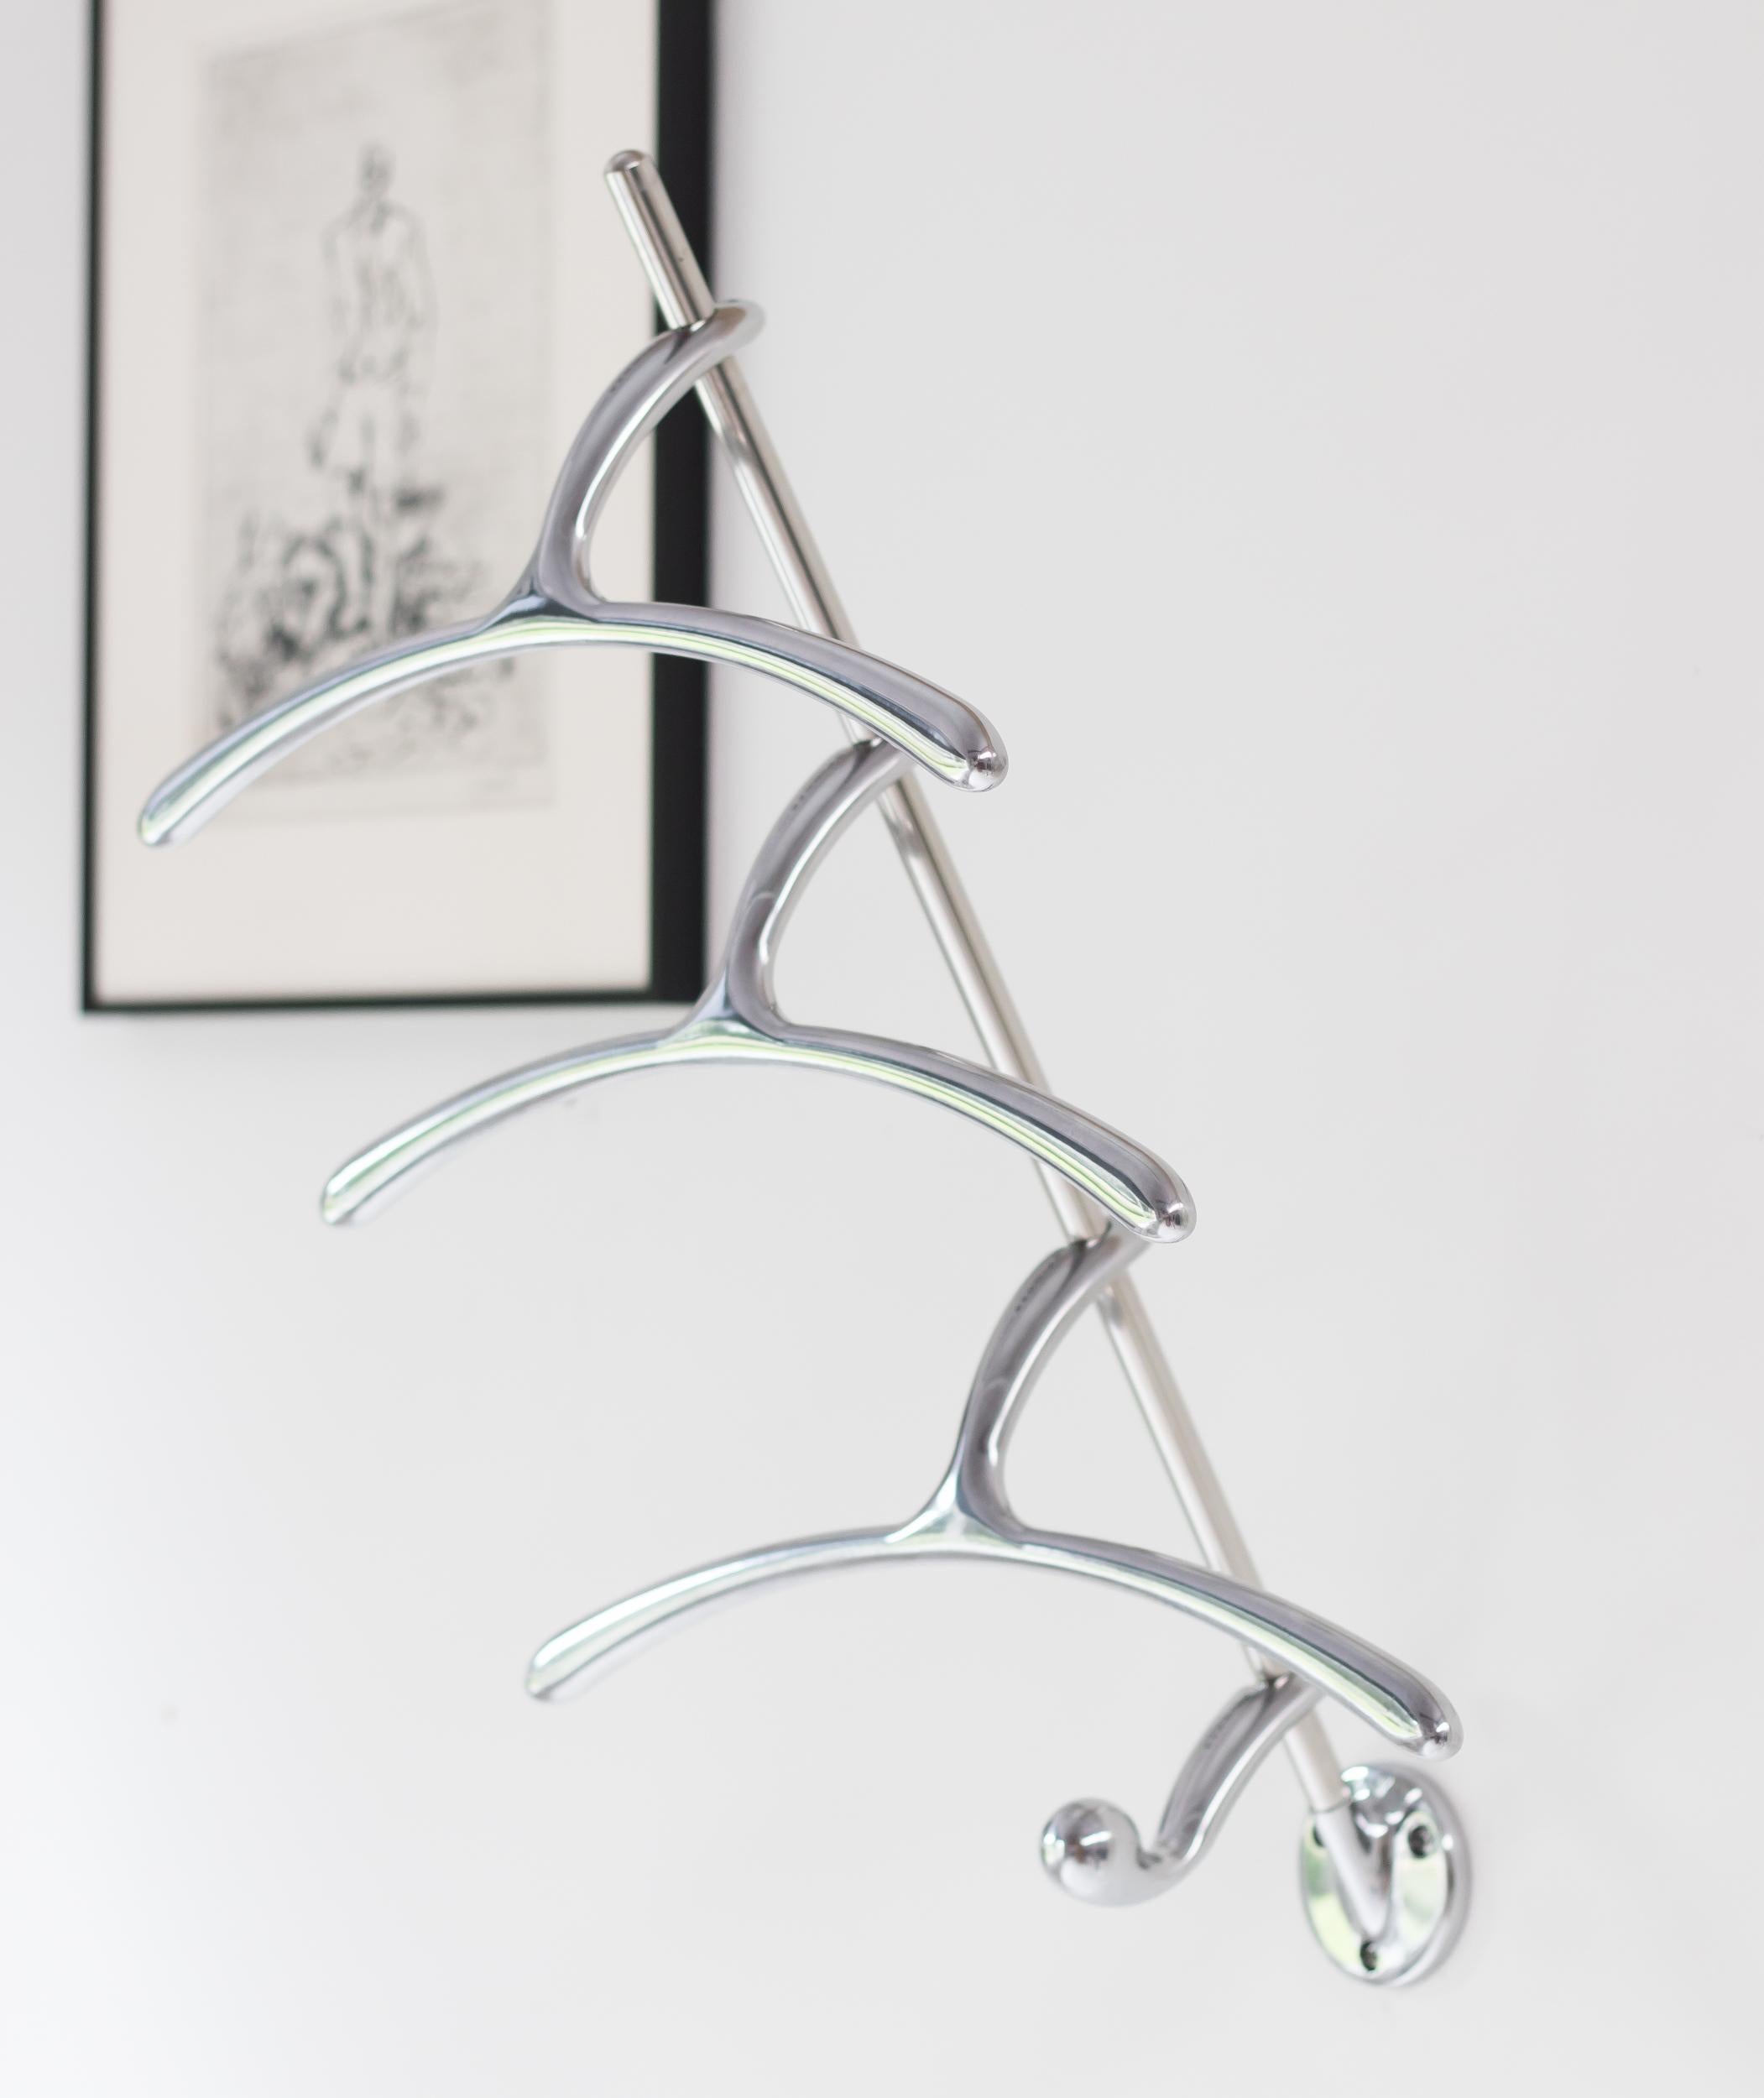 Wall-mounted coat rack in polished aluminium designed by F.A. Porsche for Spinder, The Netherlands.
In excellent condition with the original boxes.
Marked.
    